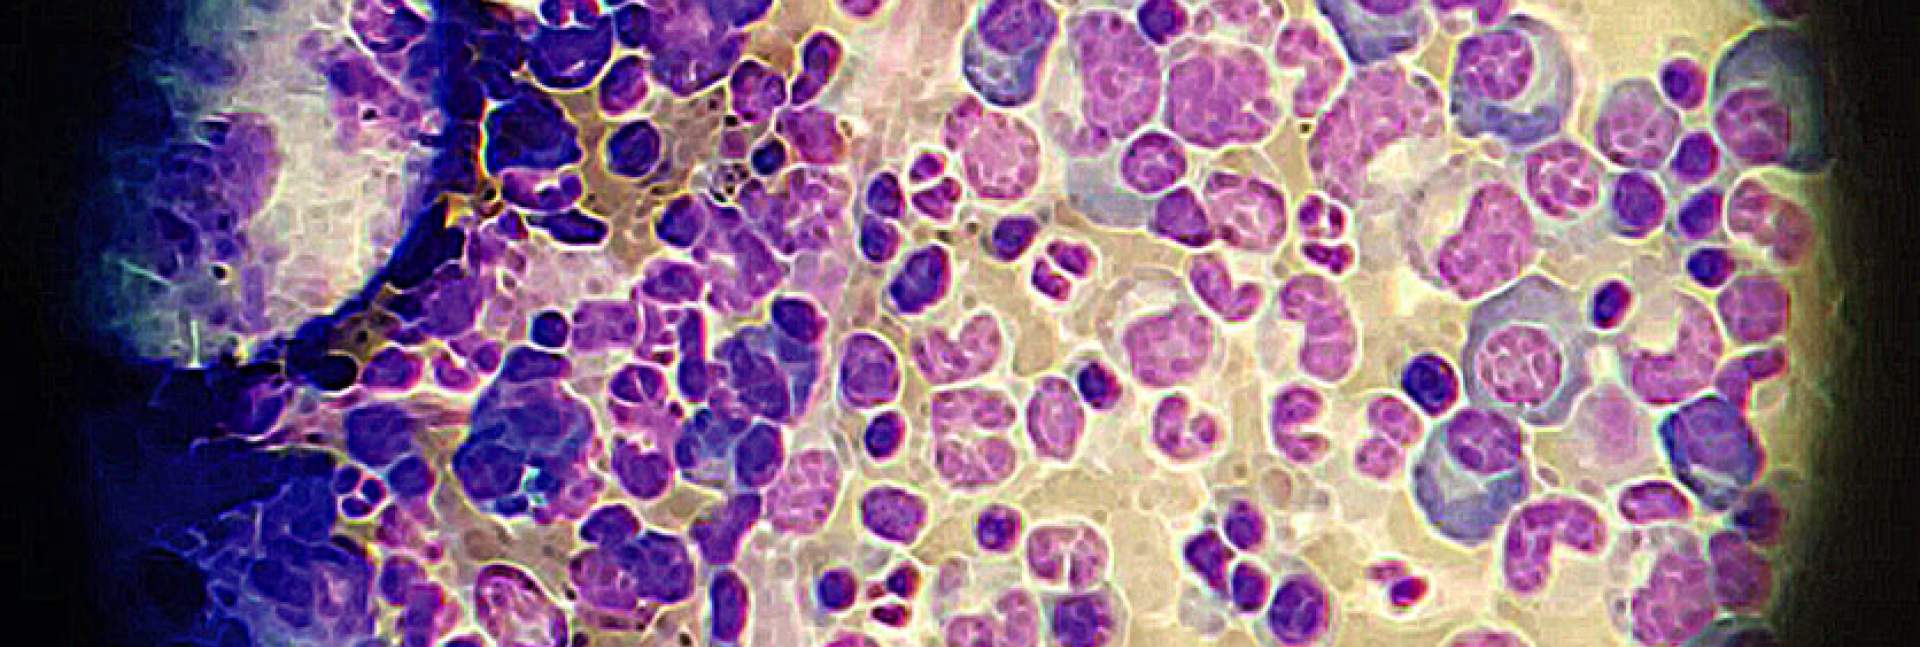 multiple myeloma drug resistant cells 